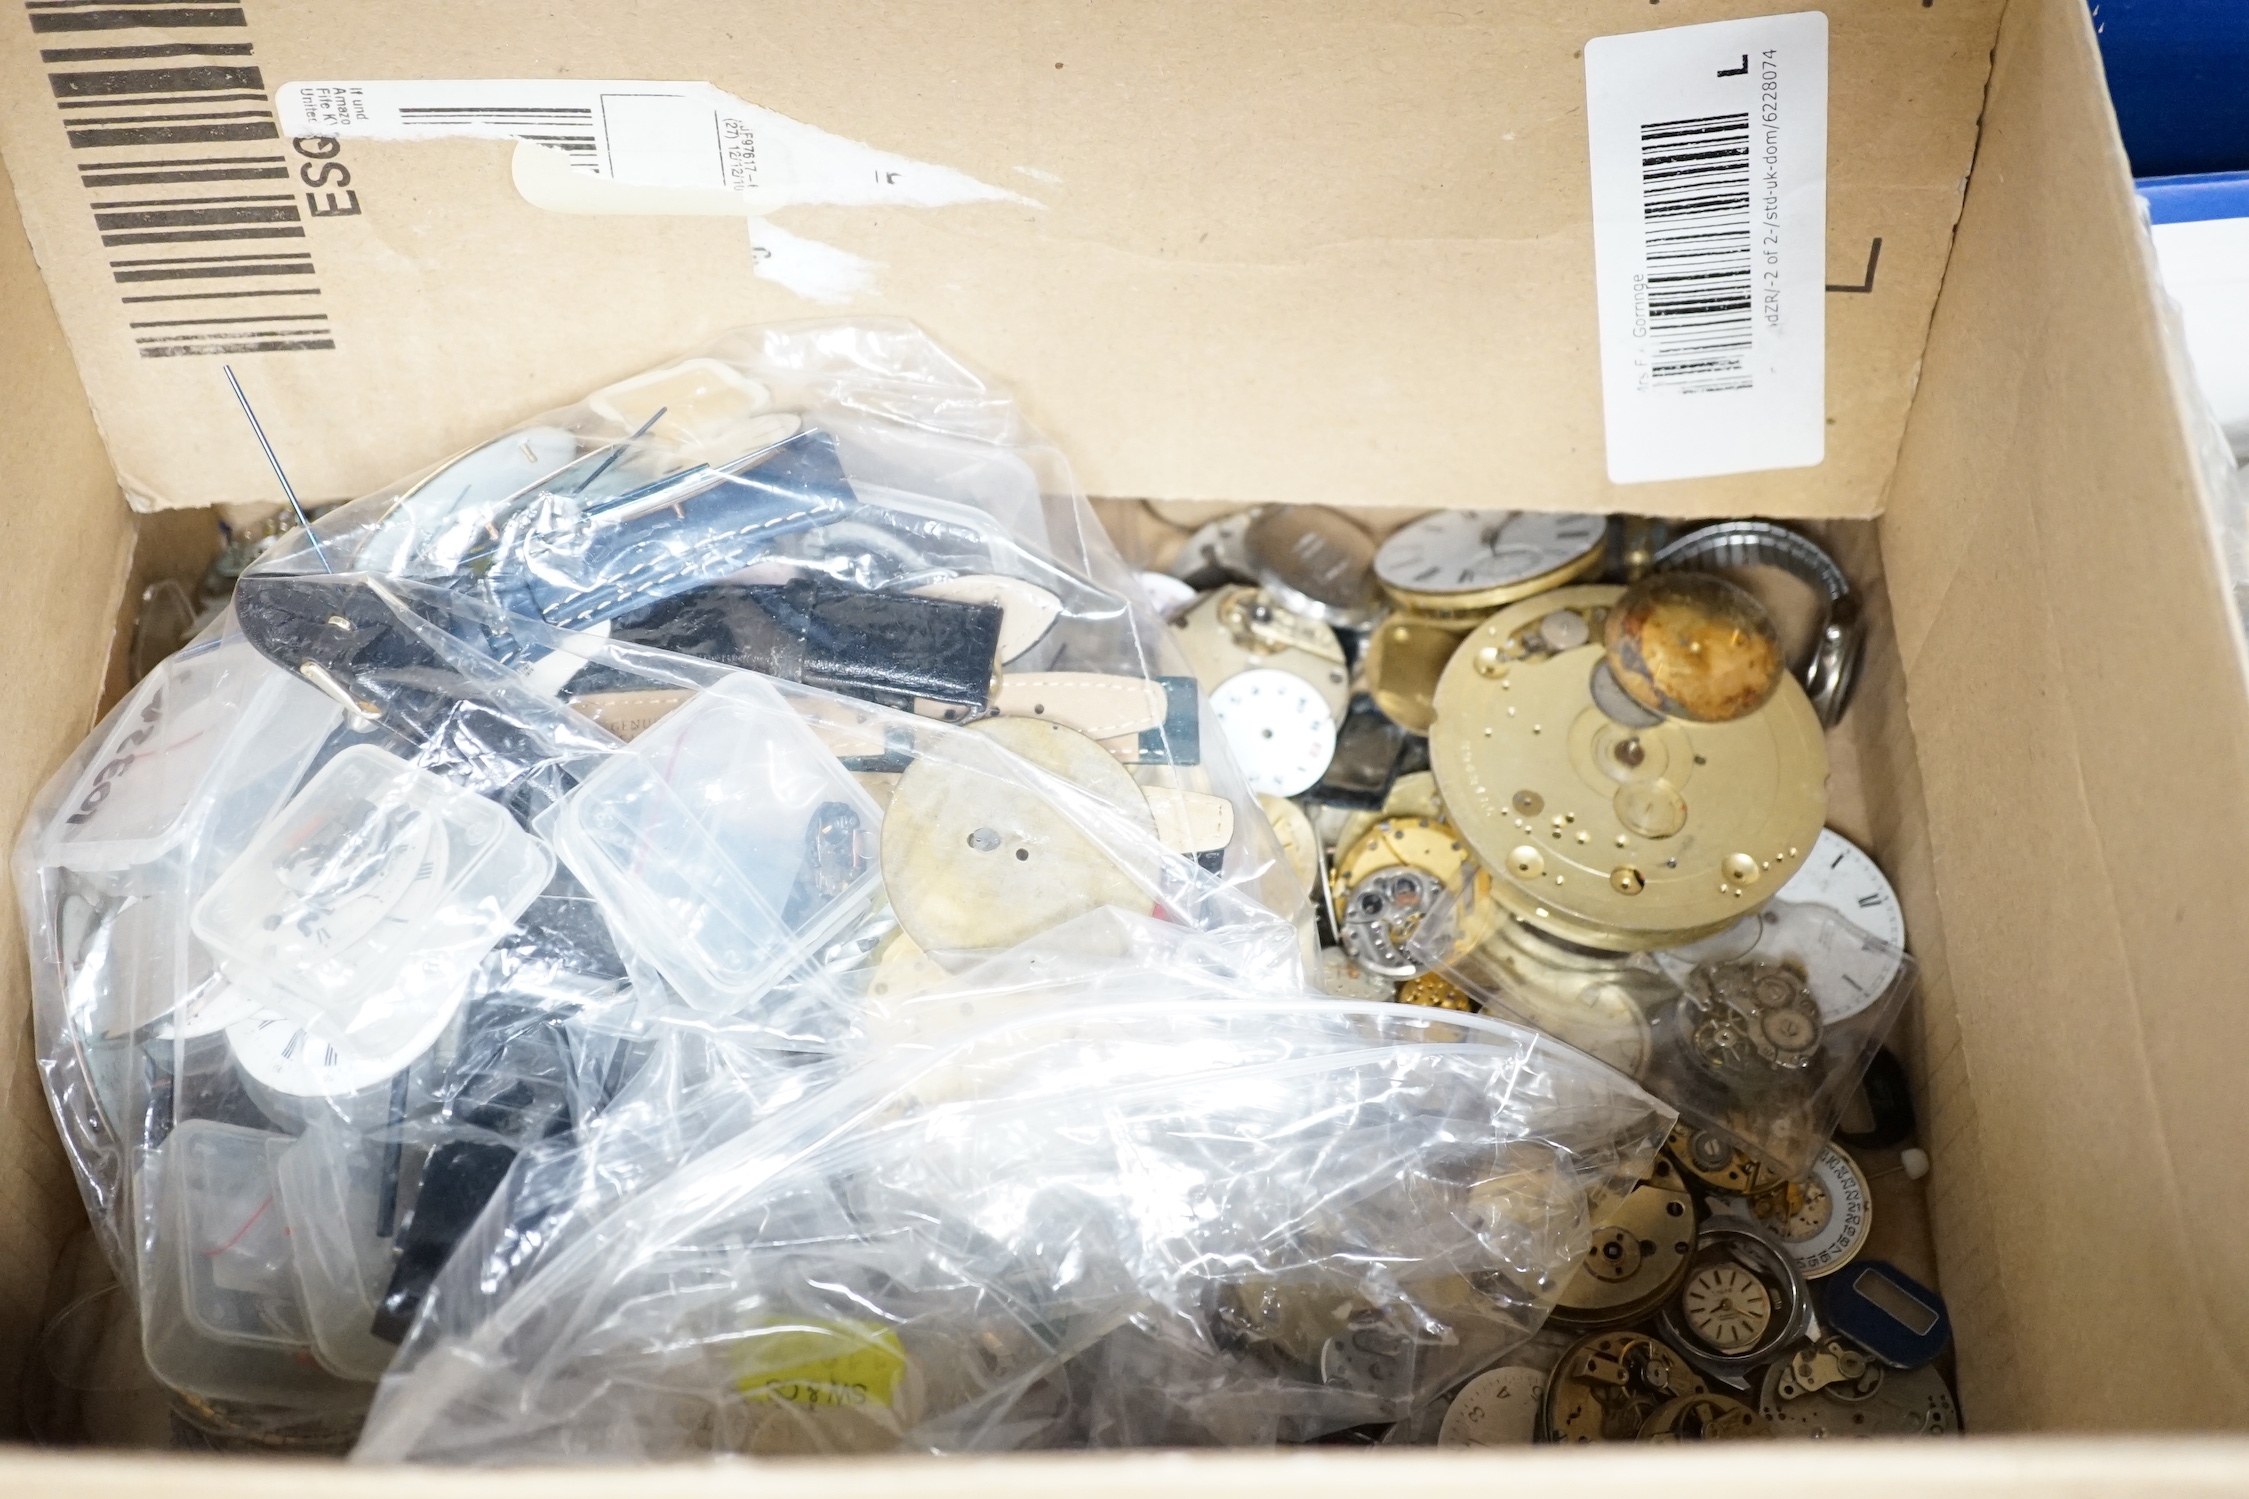 A large quantity of assorted wrist and pocket watch parts and movements, together with assorted fob watches including silver.